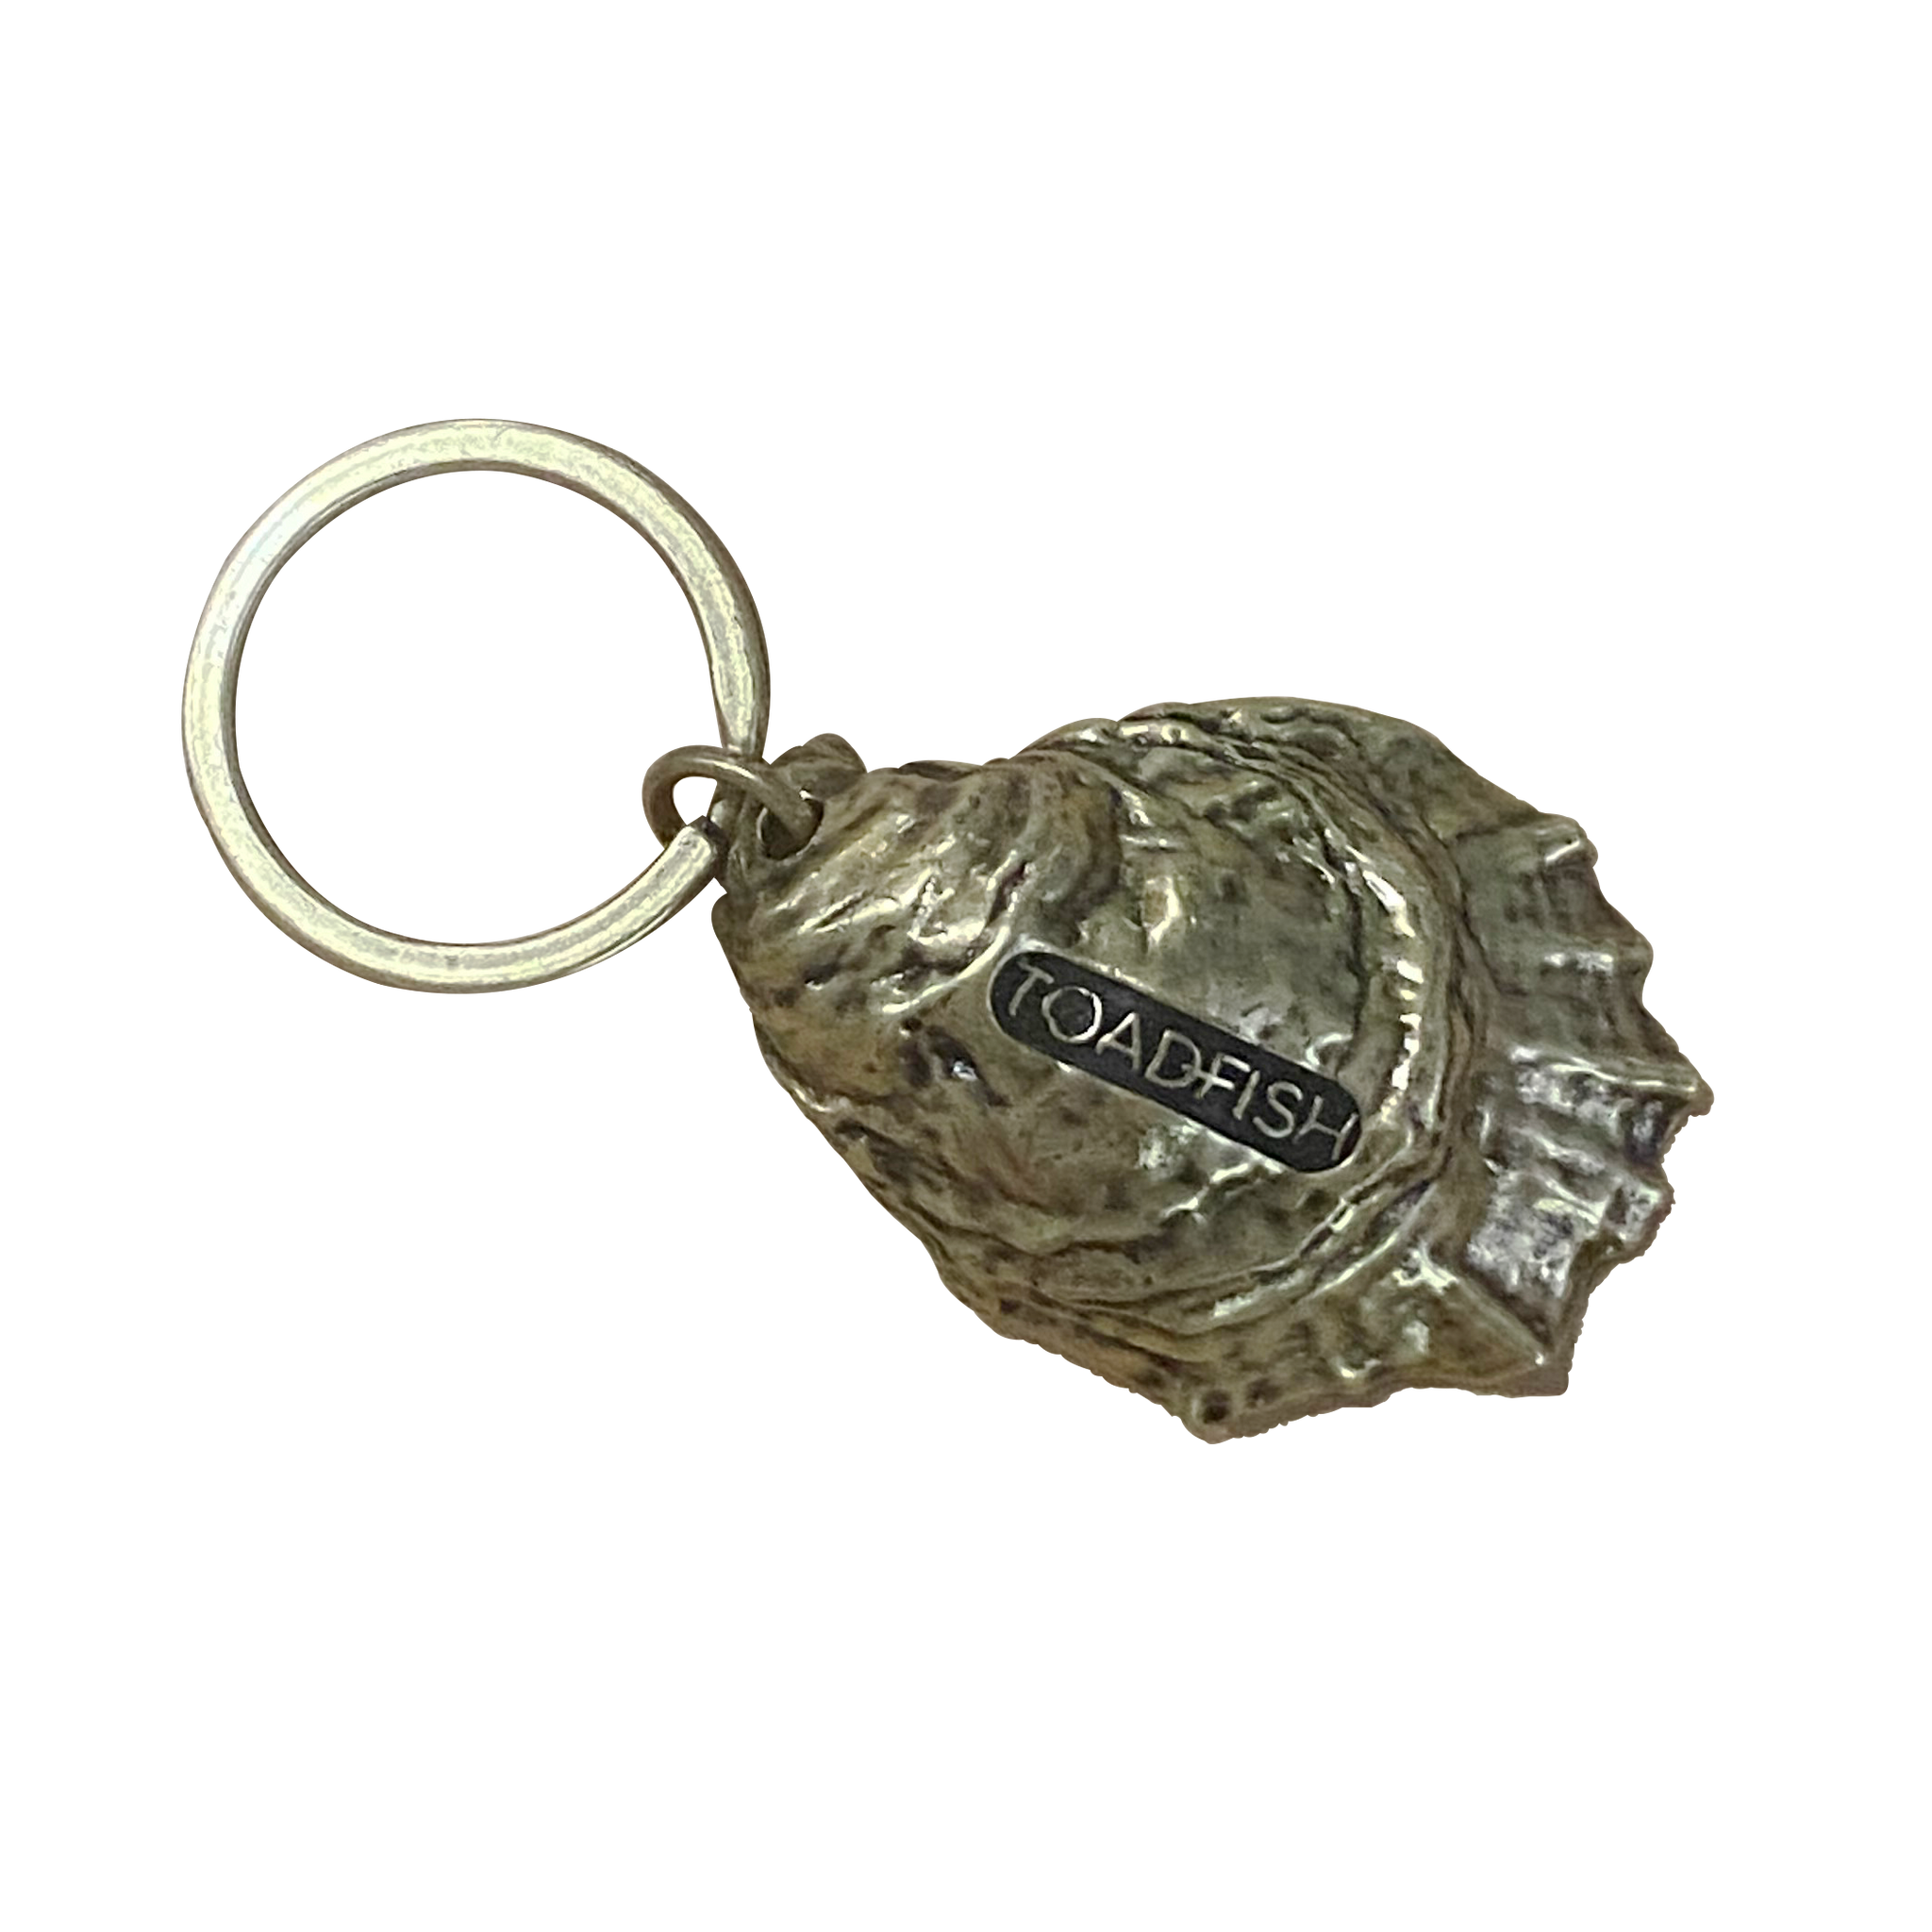 Oyster Shell Conservation Key Chain Keychains Toadfish 